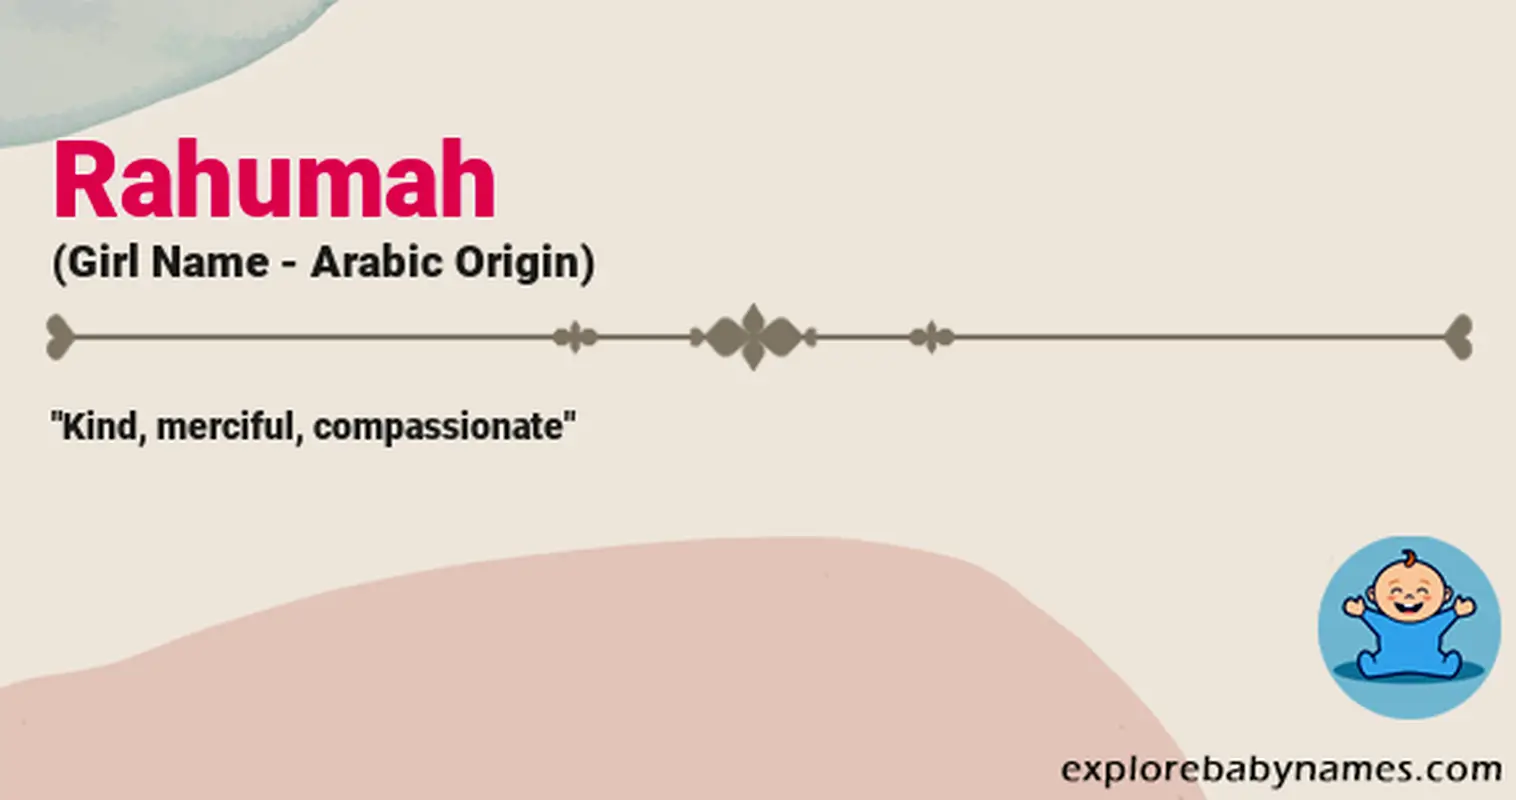 Meaning of Rahumah